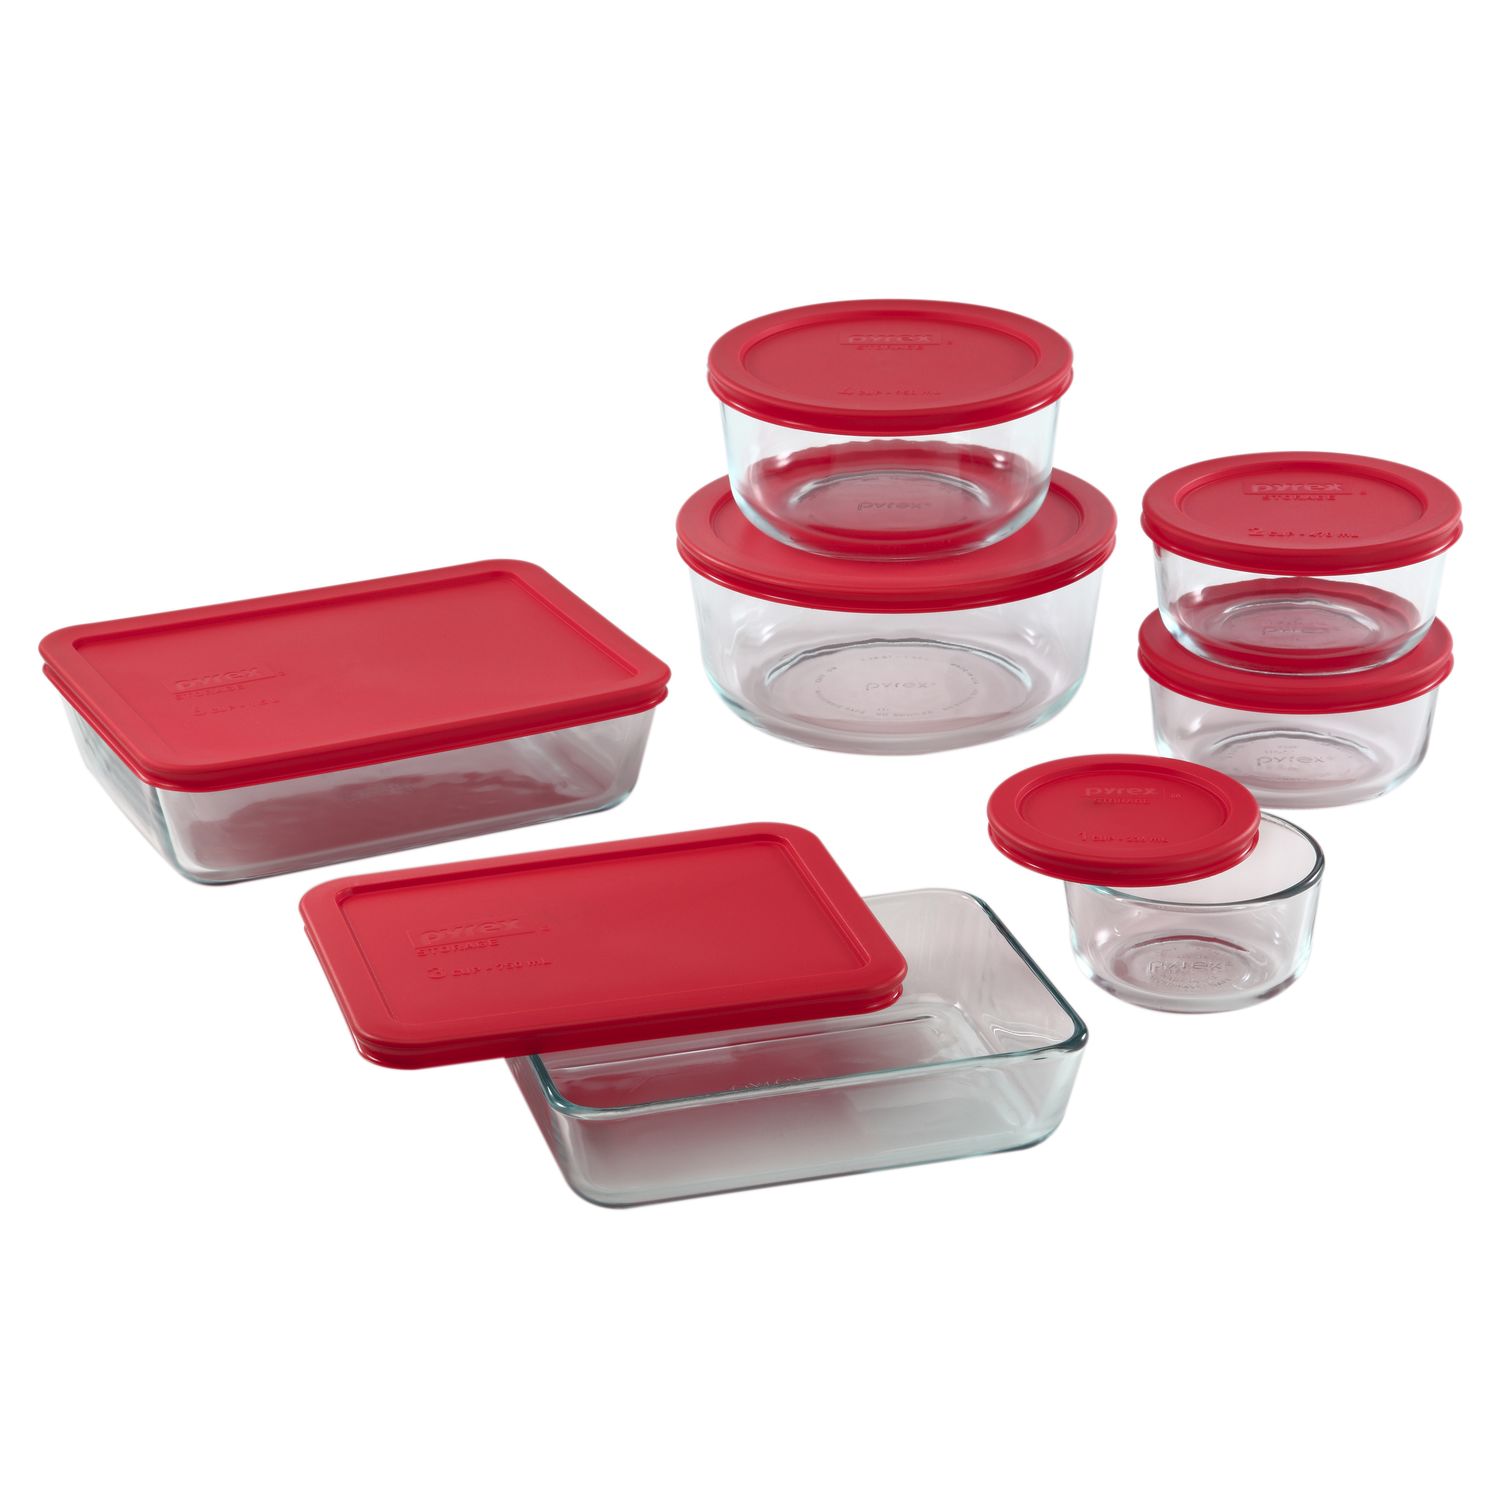 Pyrex® Storage Plus Glass Storage Container, Red, 14 Piece - image 1 of 11